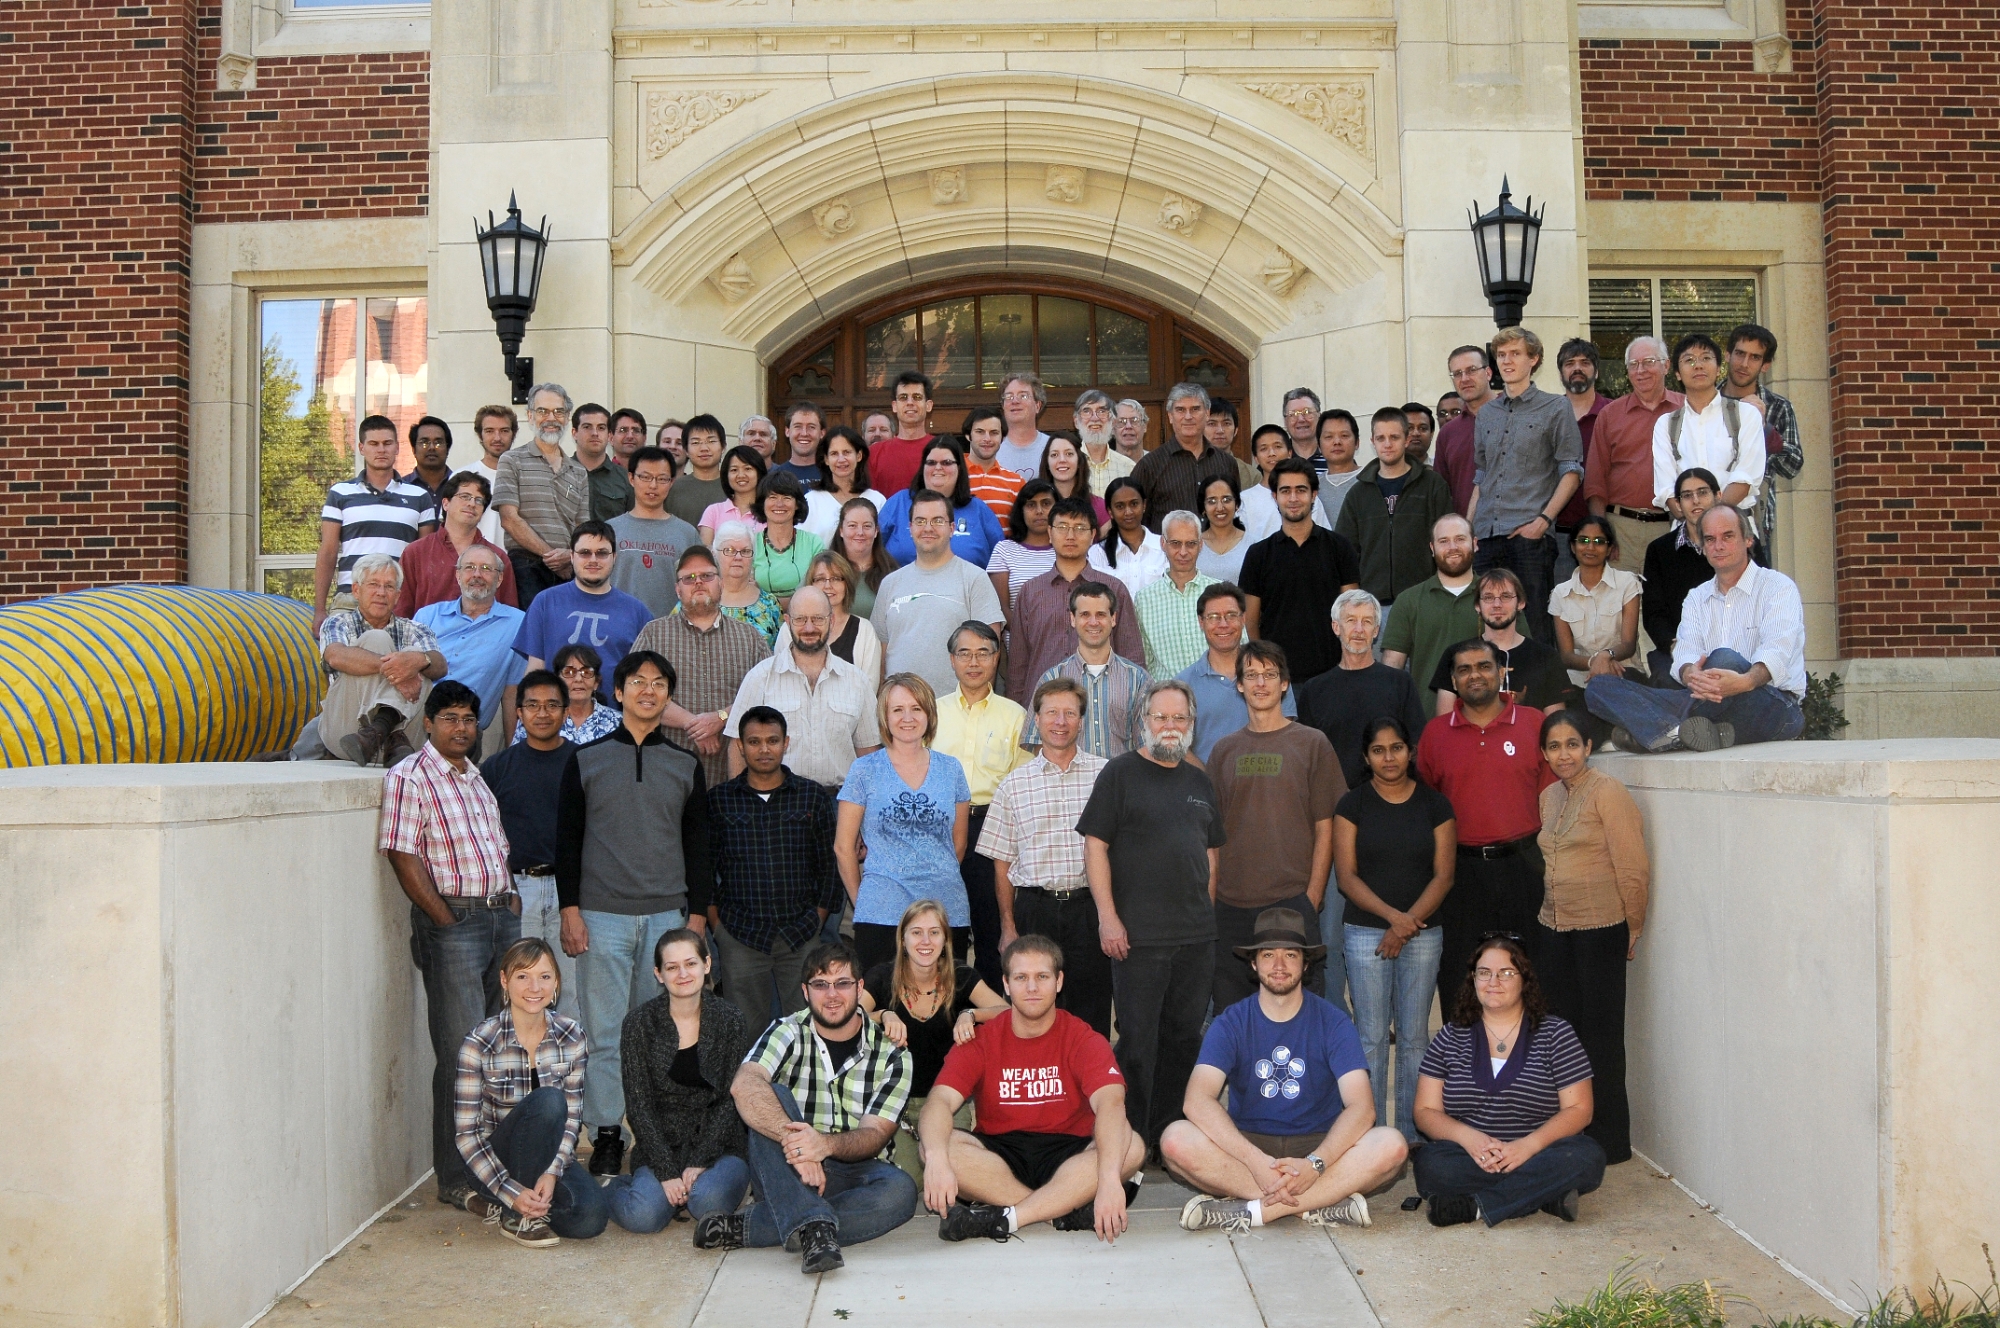 2010-2011 group photo in color.